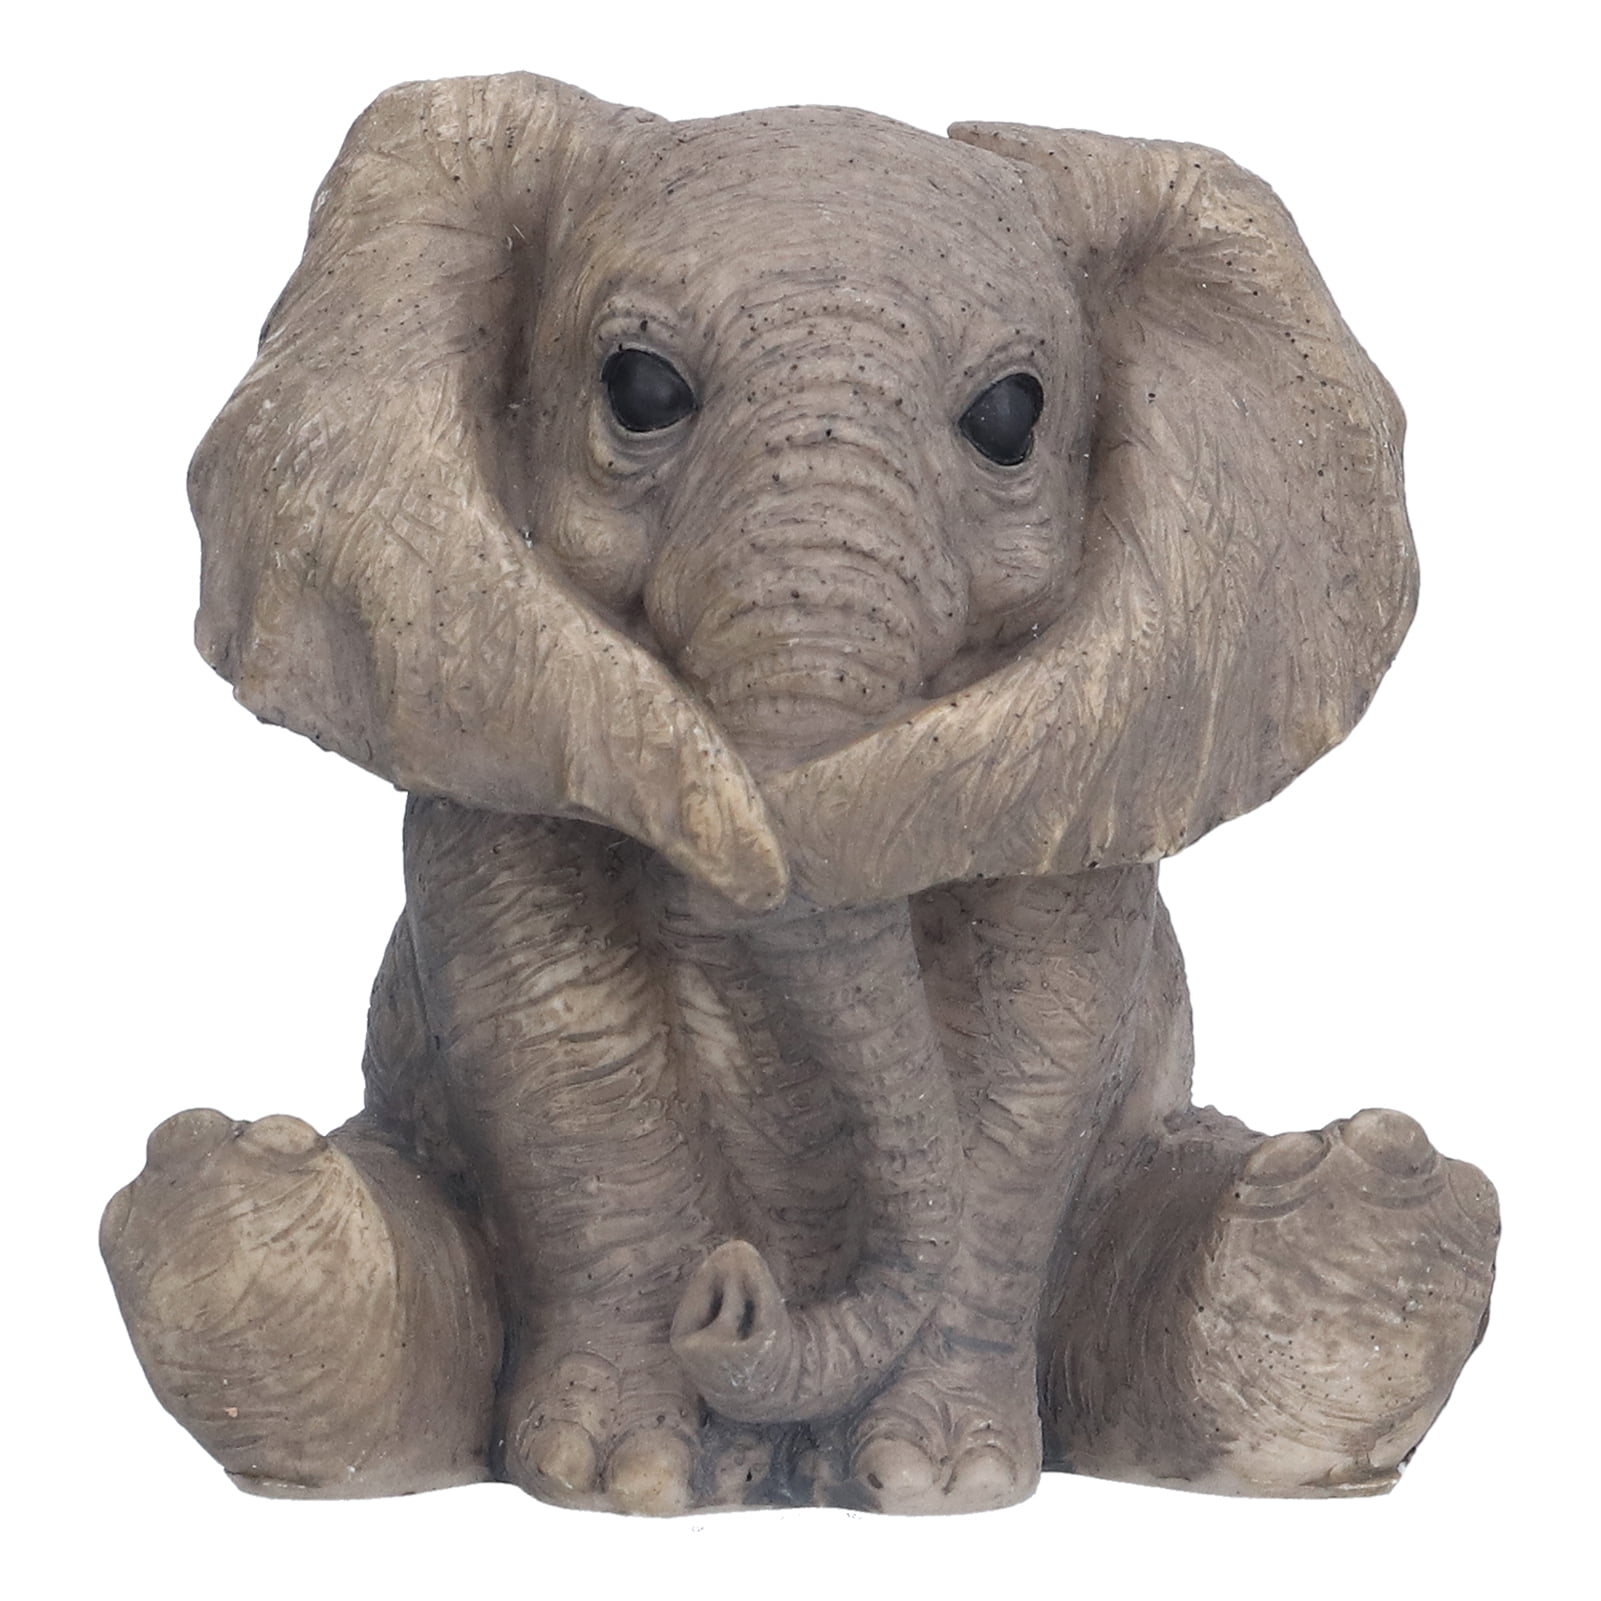 Out Of Africa Elephant Calf Sculpture Figurine Statue Home Ornament Decoration 